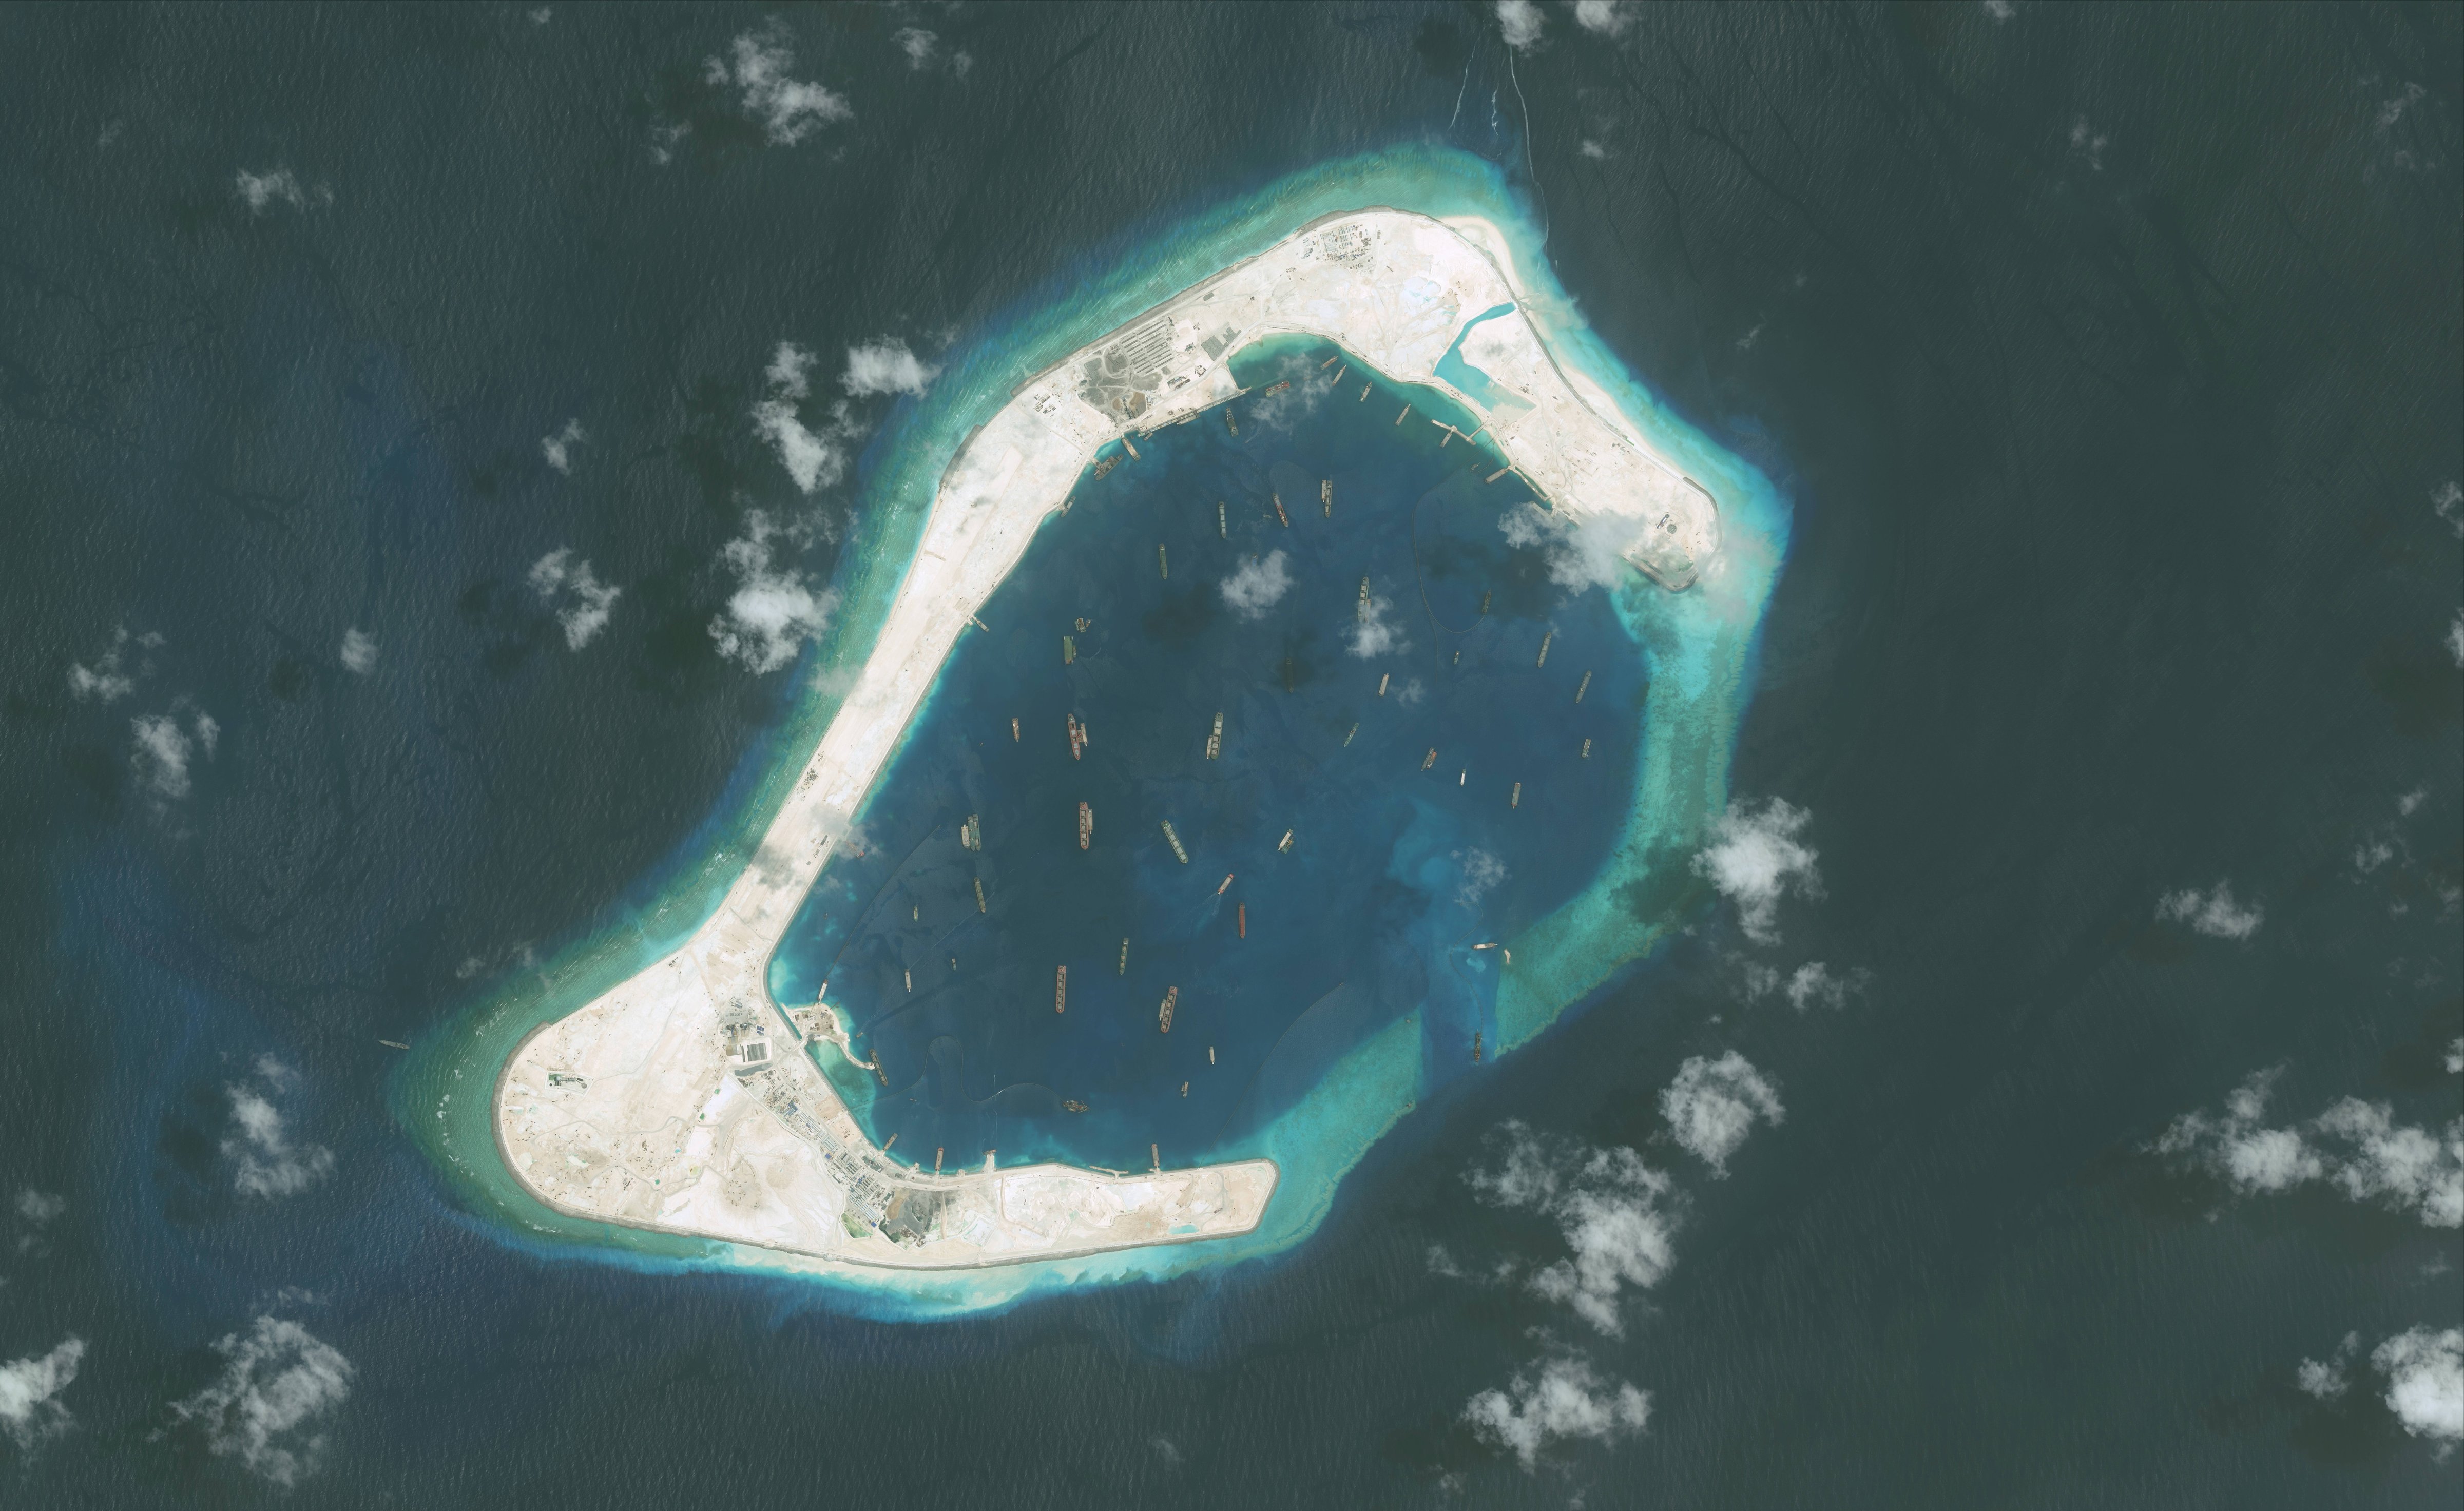 DigitalGlobe imagery of the Subi Reef in the South China Sea, a part of the Spratly Islands group. Photo DigitalGlobe via Getty Images.